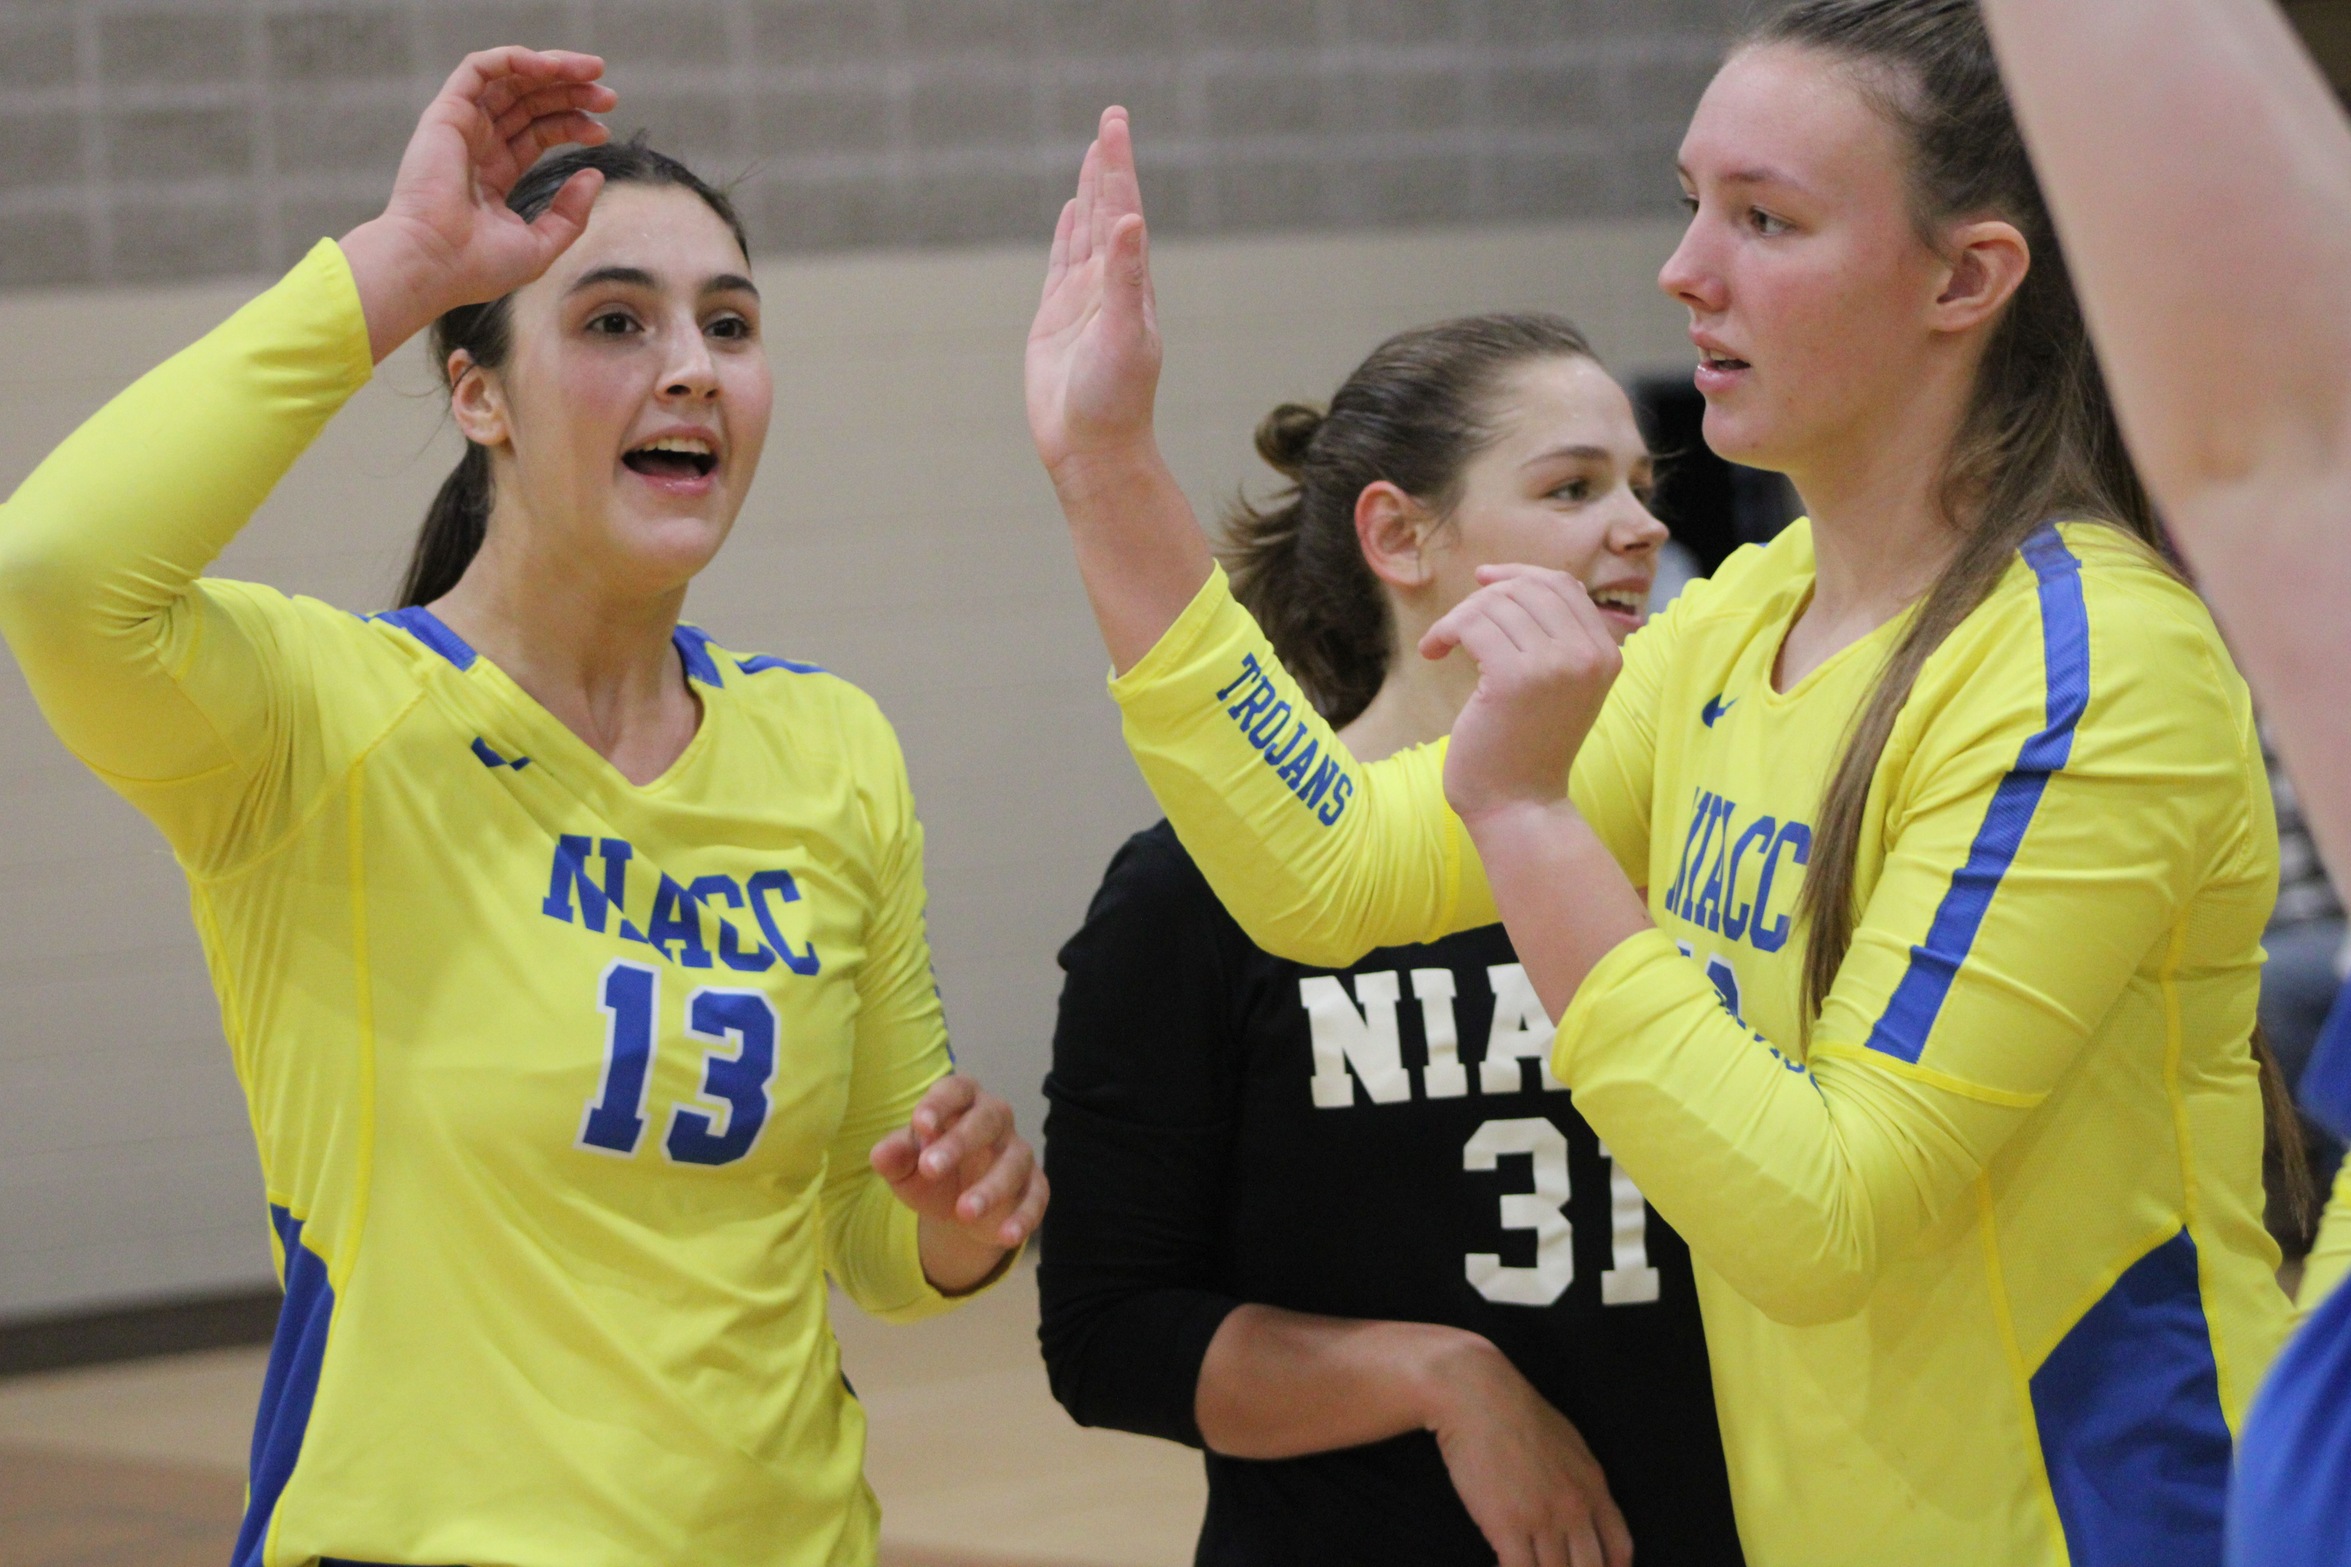 NIACC players celebrate a win Saturday at the NIACC tournament.